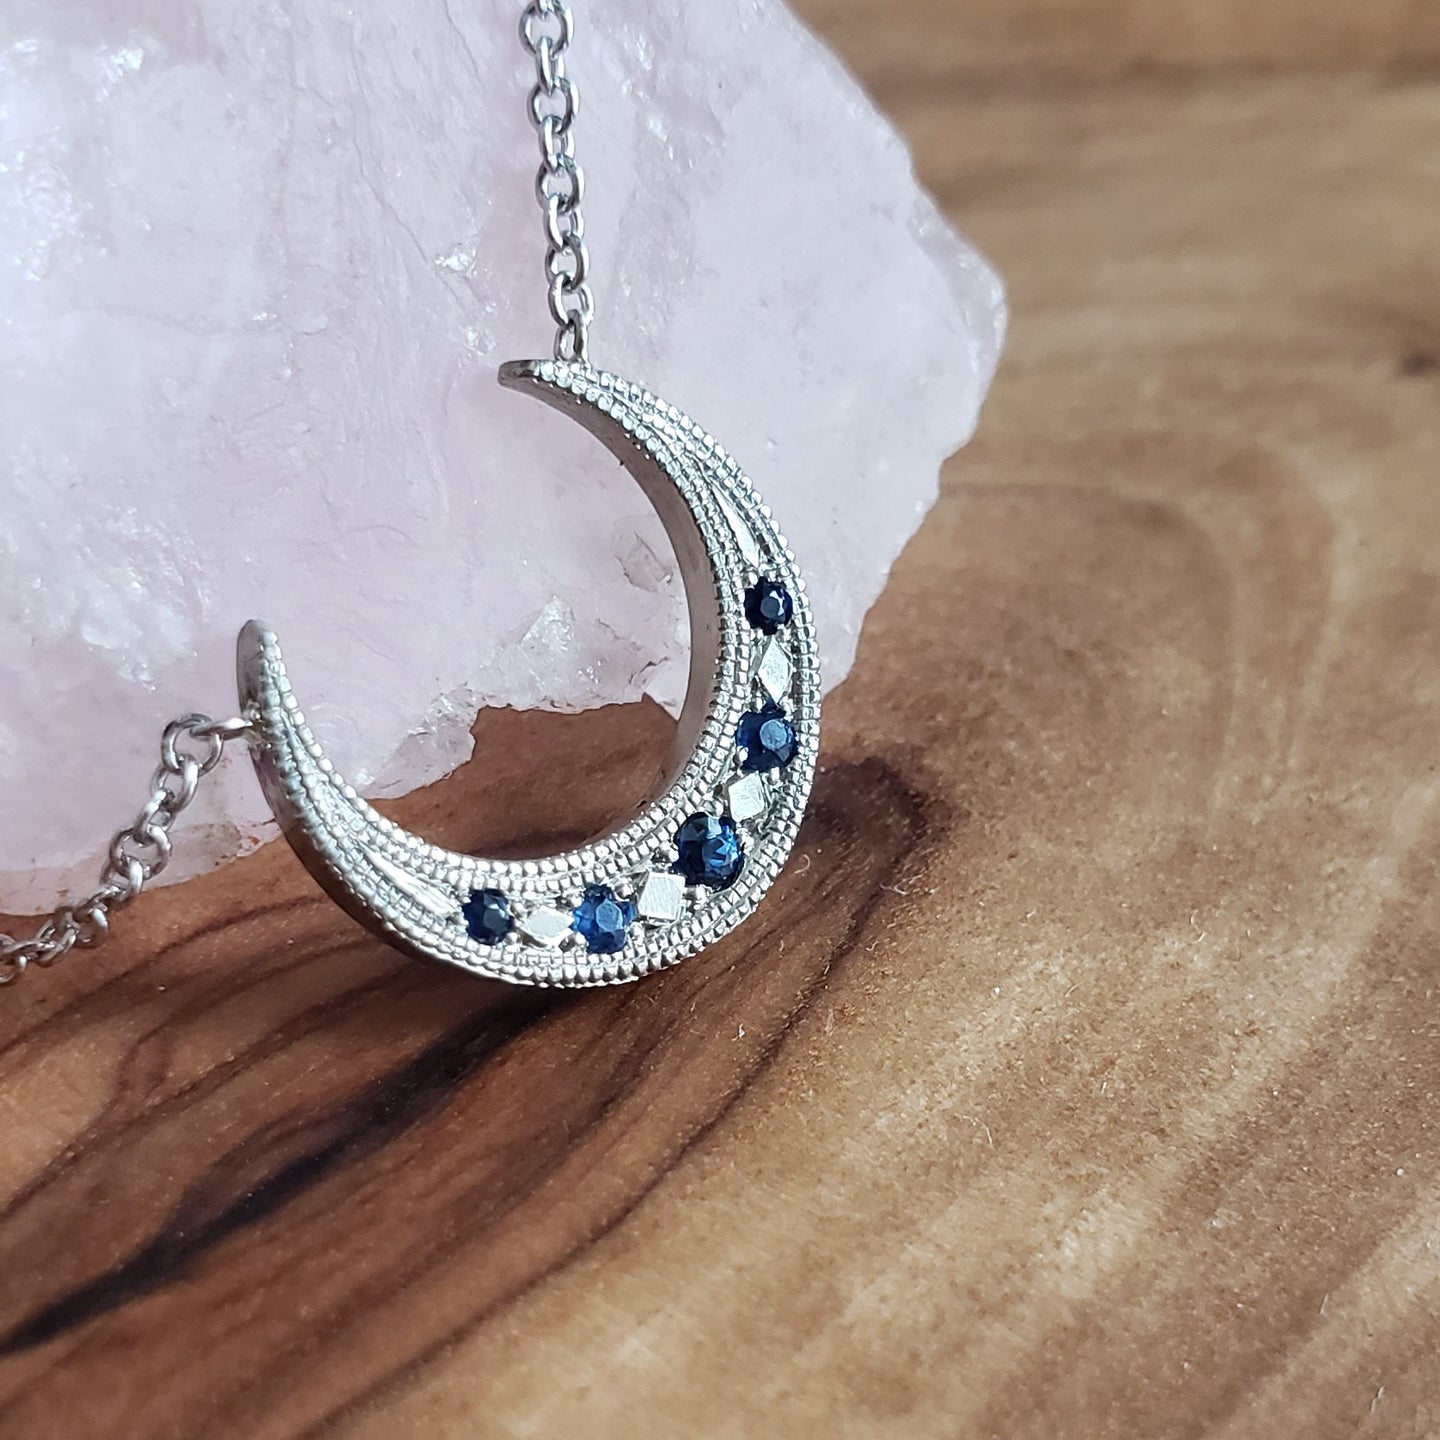 Up Turned Crescent Moon Necklace, 10k White Gold, Blue Sapphire, 18